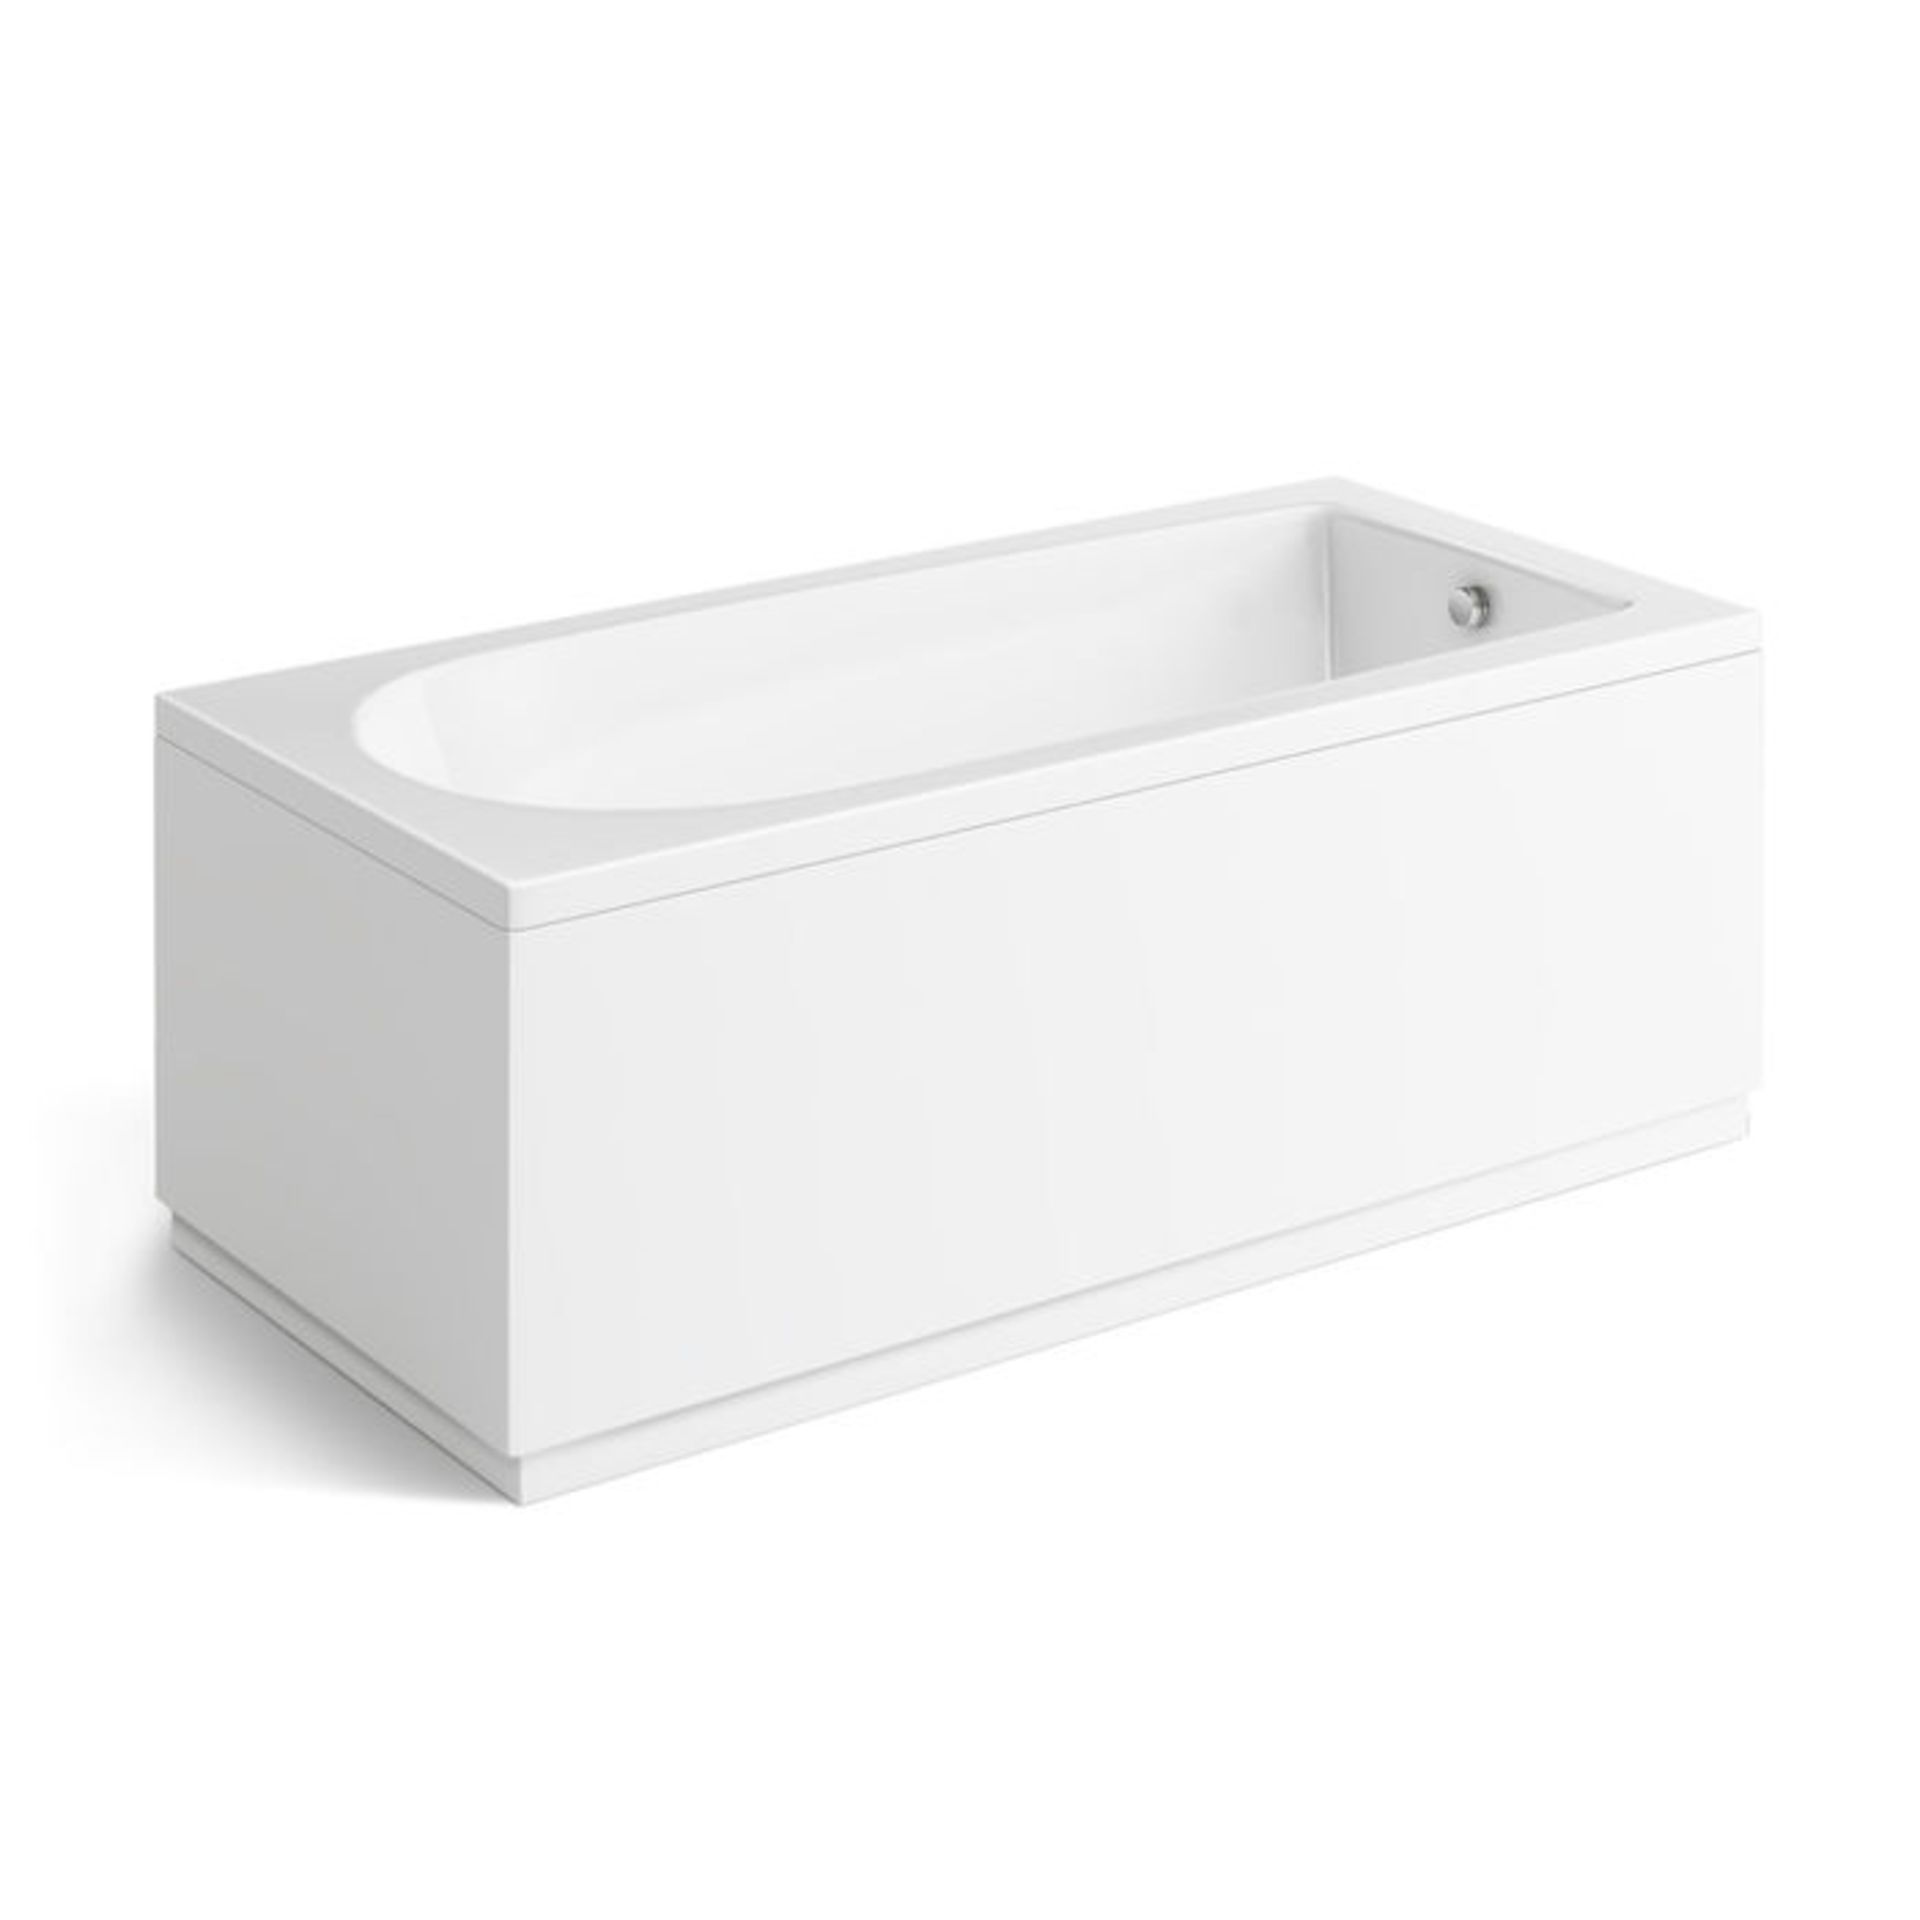 (KL131) 1500 x 700mm Round Single Ended Bath. RRP £332.99. Comes complete with side and end panel. - Image 3 of 3